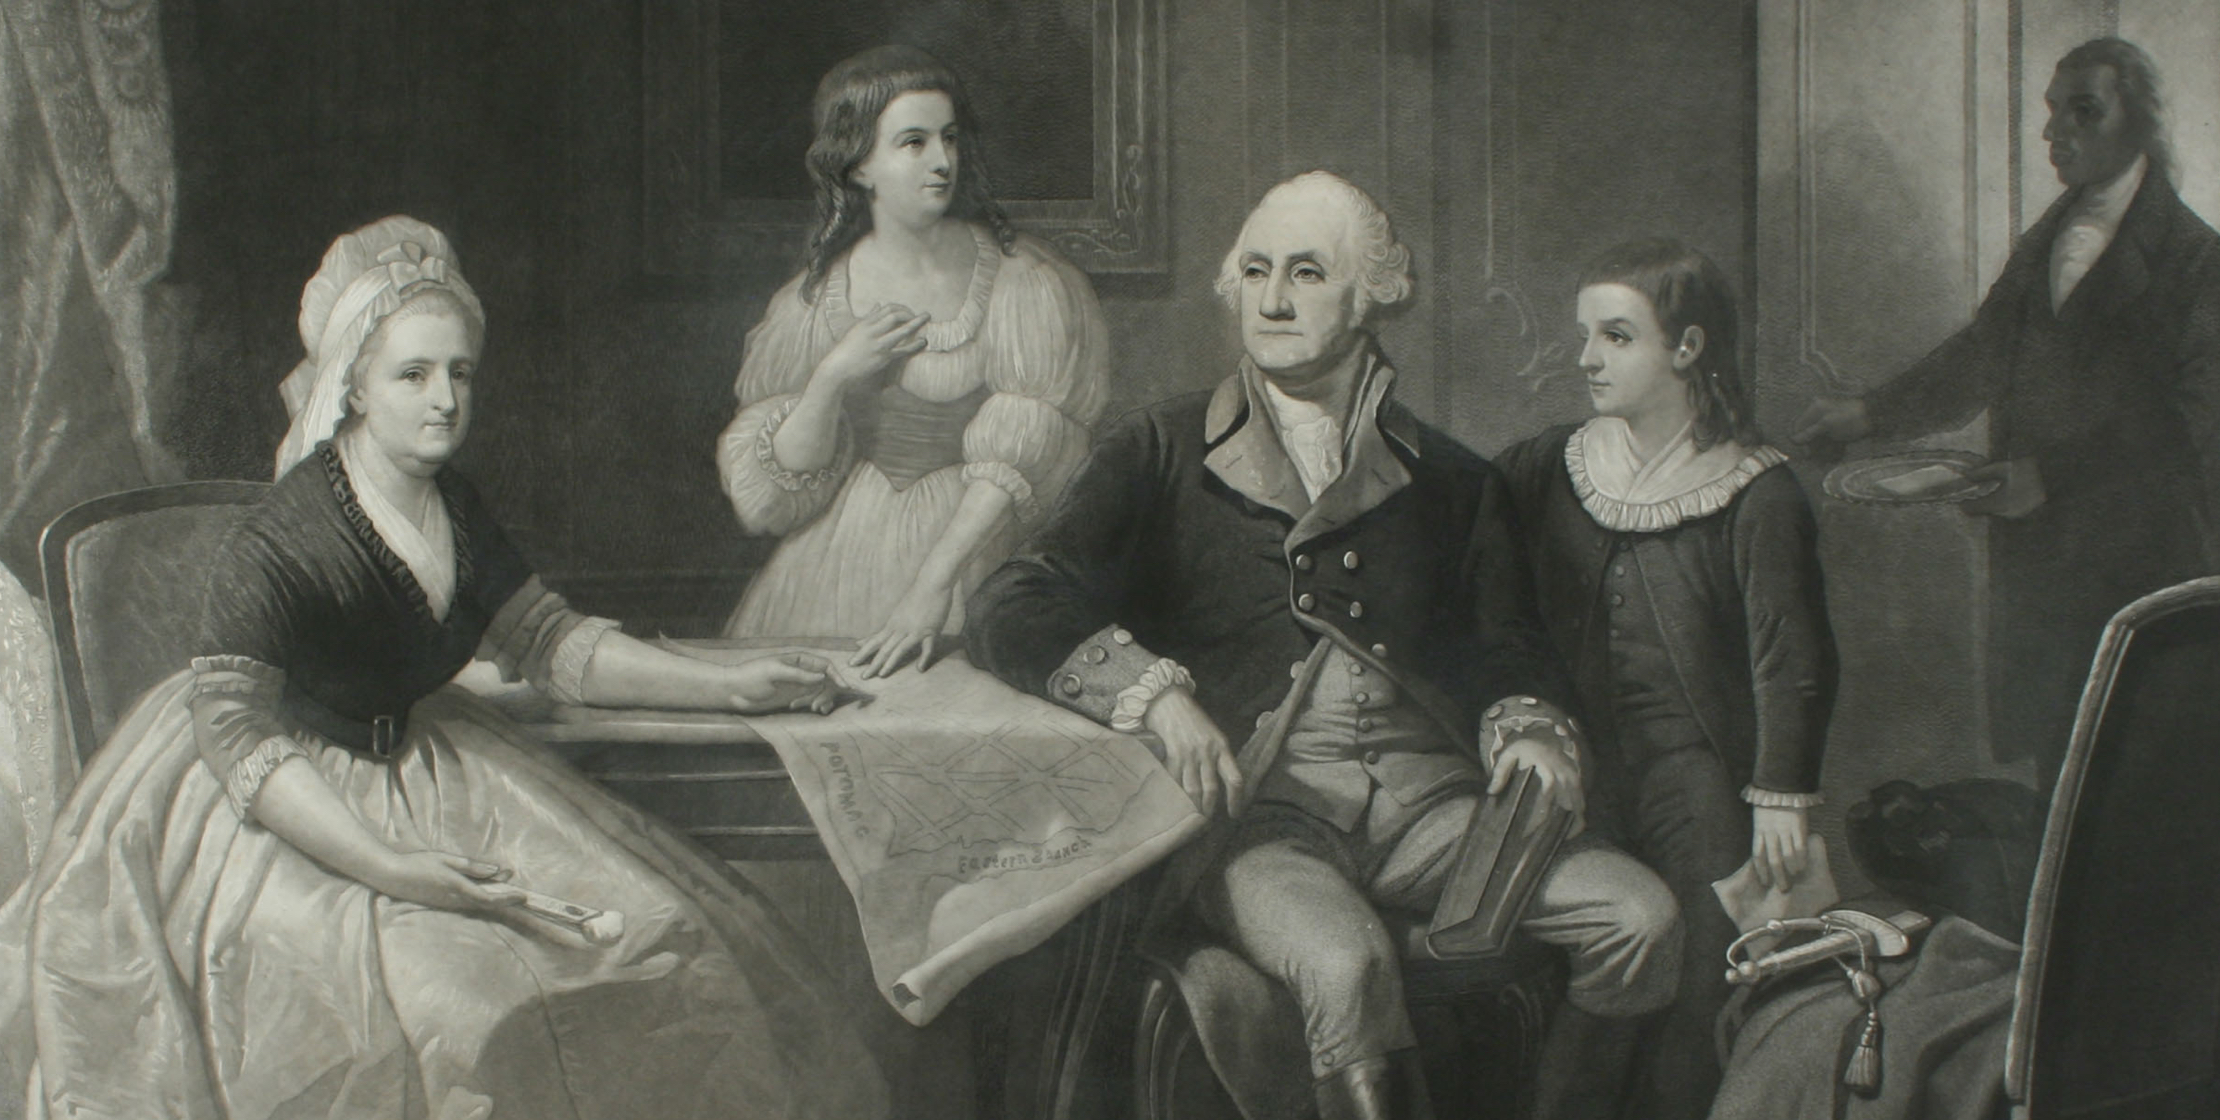 Print showing George and Martha Washington sitting at a table with a woman, child and servant standing behind them.